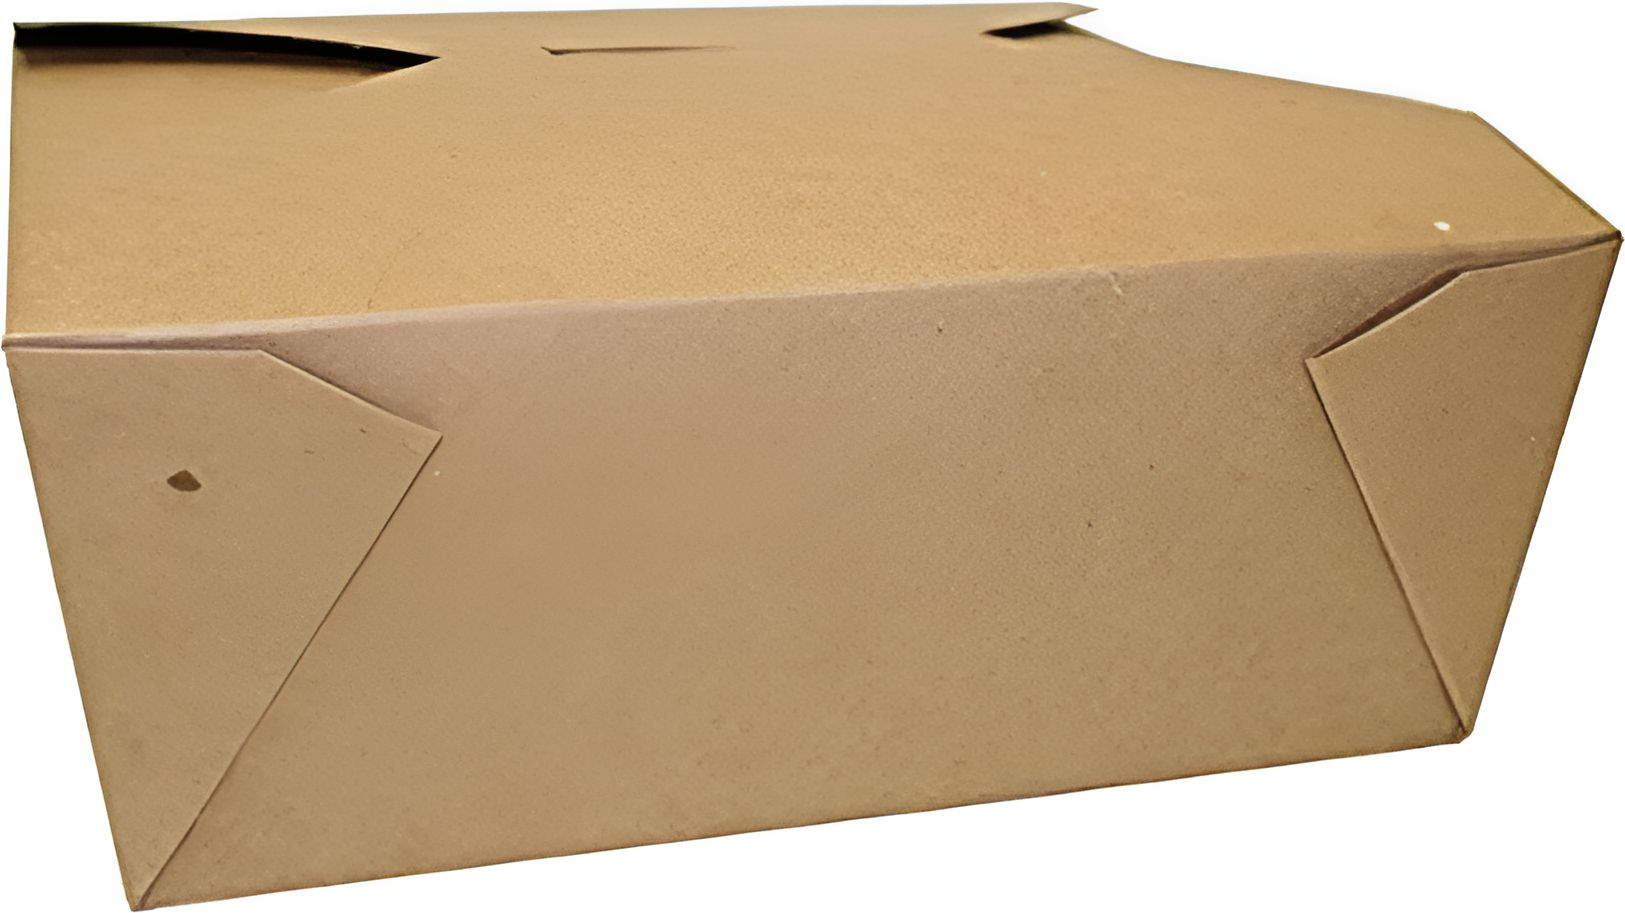 Fc Meyer Packaging - 8.5" x 8.5" White Cardboard Grease Resistant Take Out Container, 120/cs - MPK6K